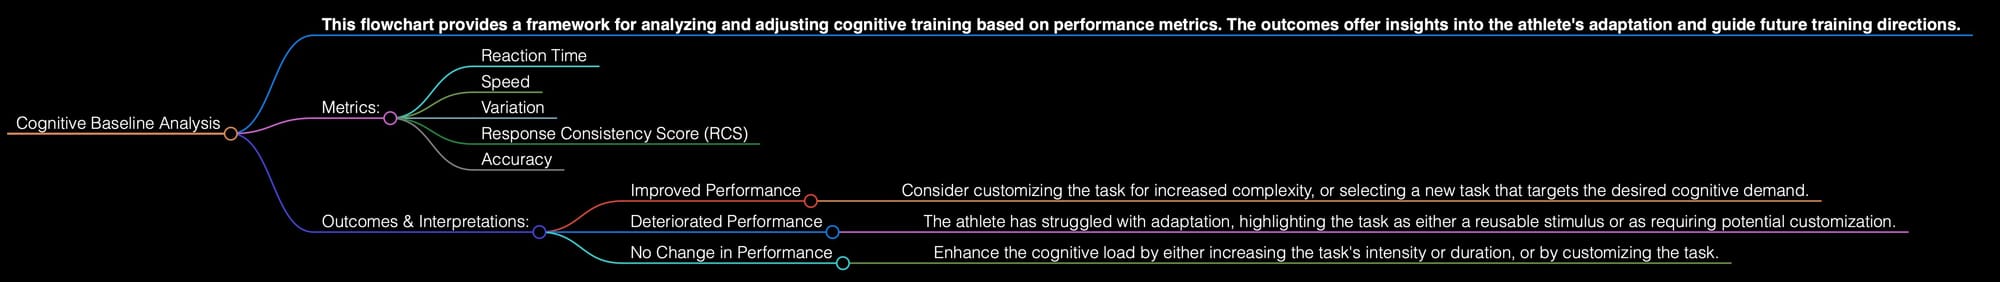 Cognitive Baseline Analysis Simplified